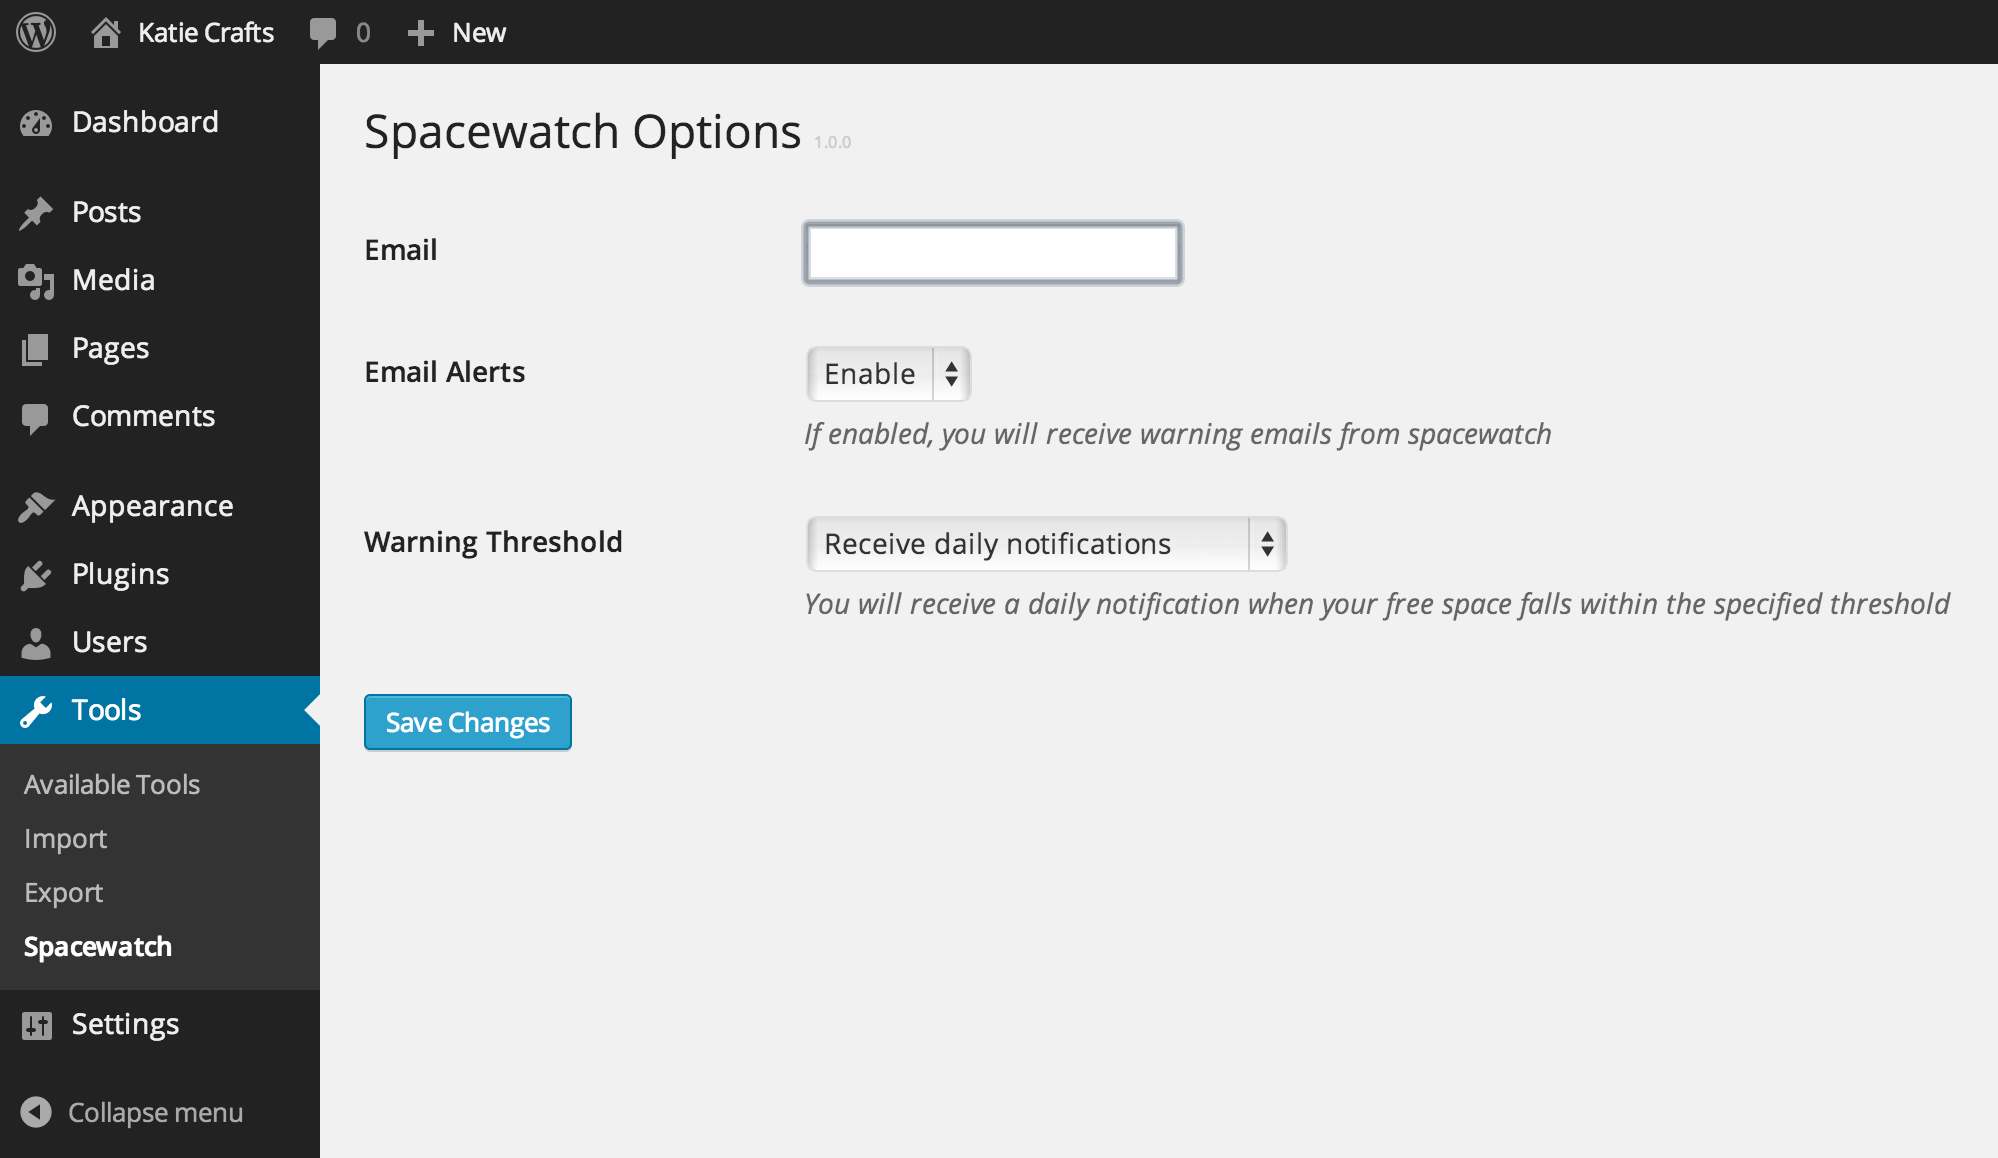 Email notifications can be enabled or disabled from the Tools > Spacewatch options page.